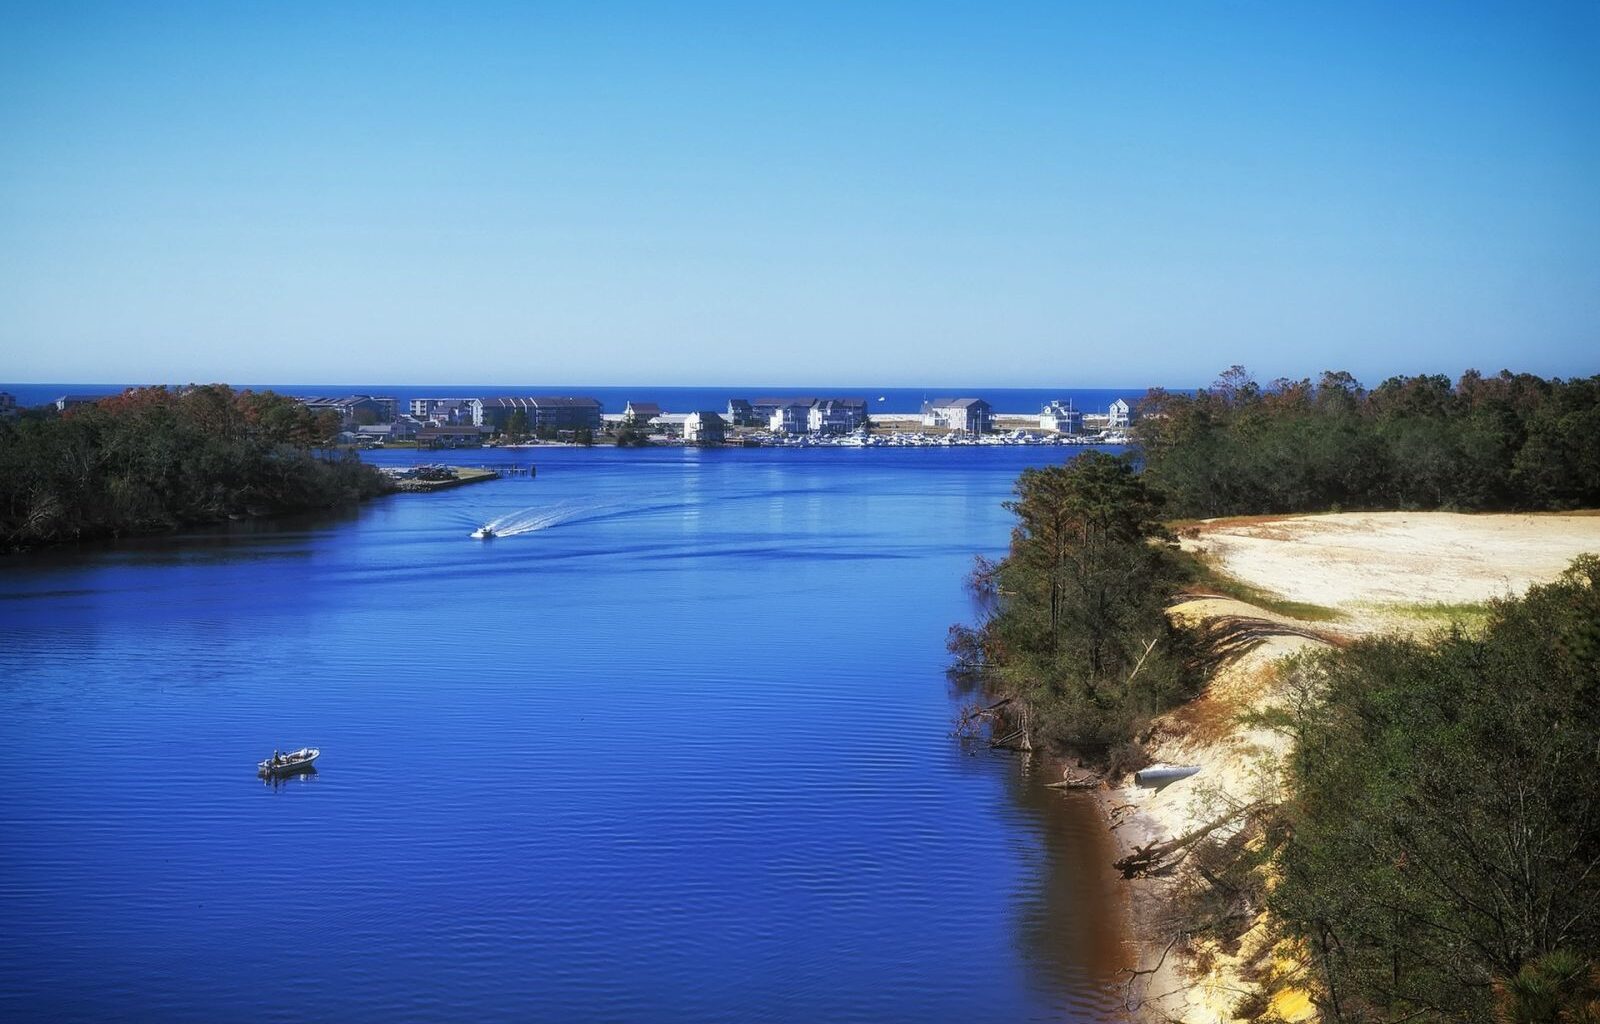 things to do in wilmington nc